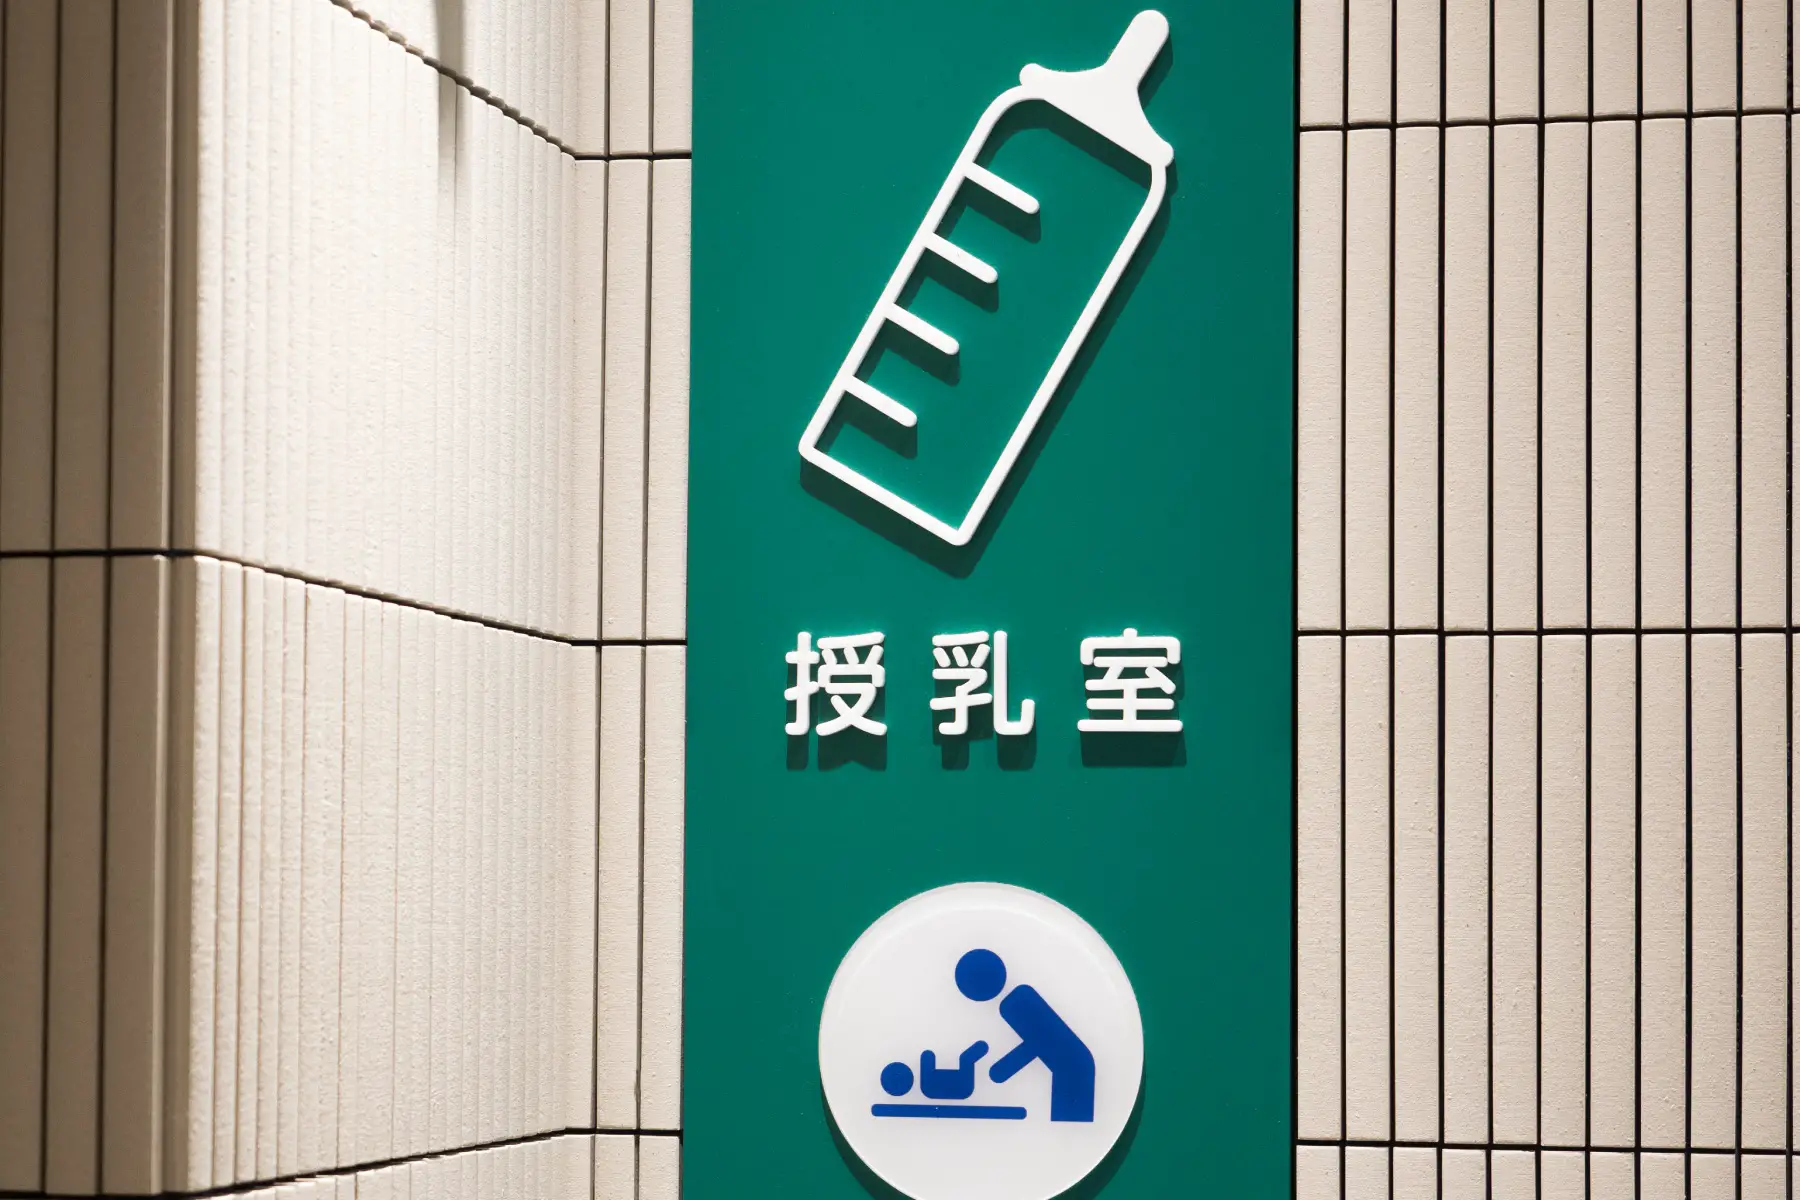 A green breastfeeding sign outside a public facility in Japan.